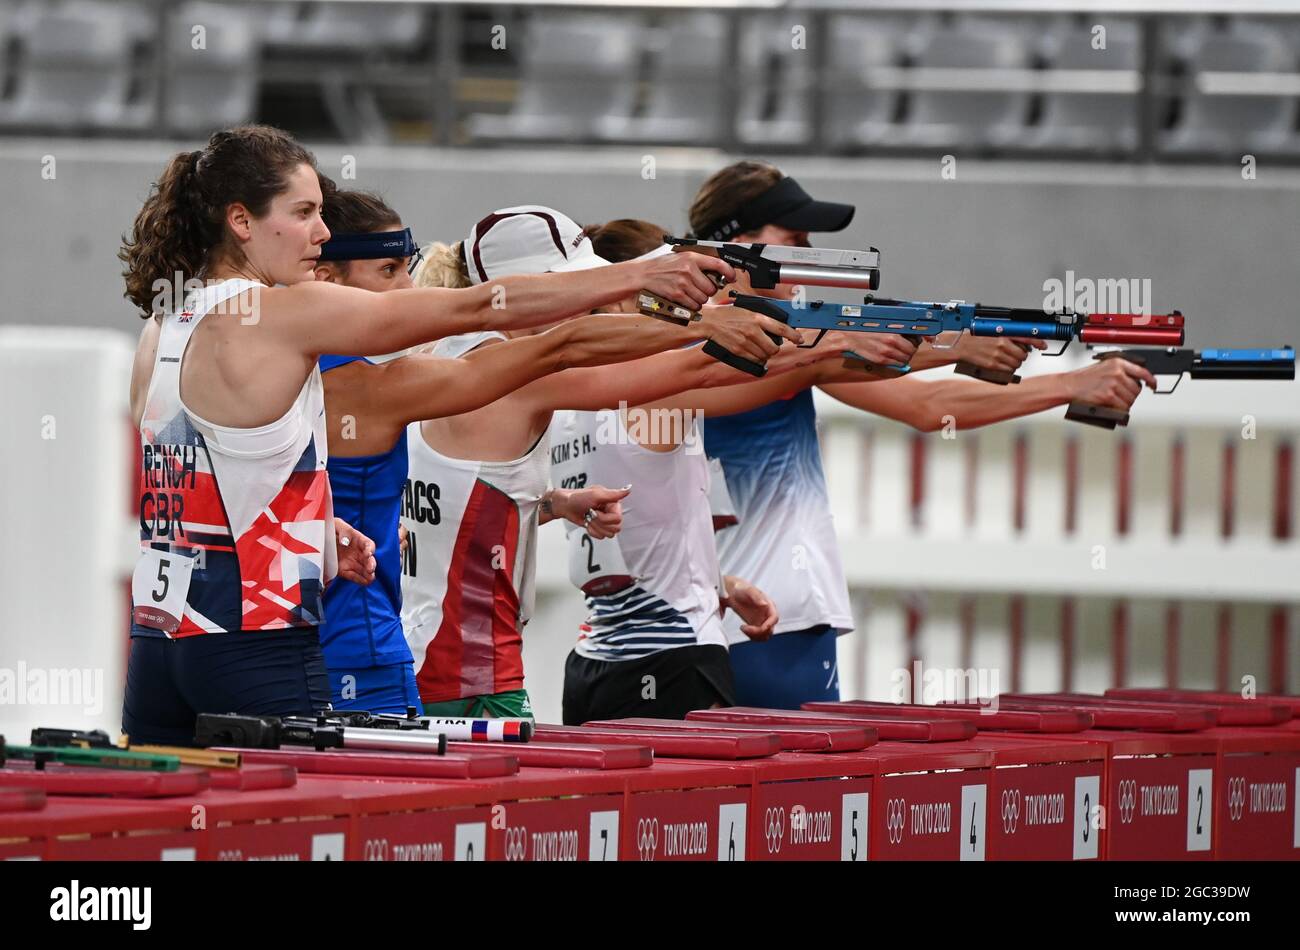 Tokyo, Japan. 6th Aug, 2021. Kate French (1st L) of Britain competes in the shooting portion of the women's individual of modern pentathlon at Tokyo 2020 Olympic Games, in Tokyo, Japan, Aug. 6, 2021. Credit: Dai Tianfang/Xinhua/Alamy Live News Stock Photo